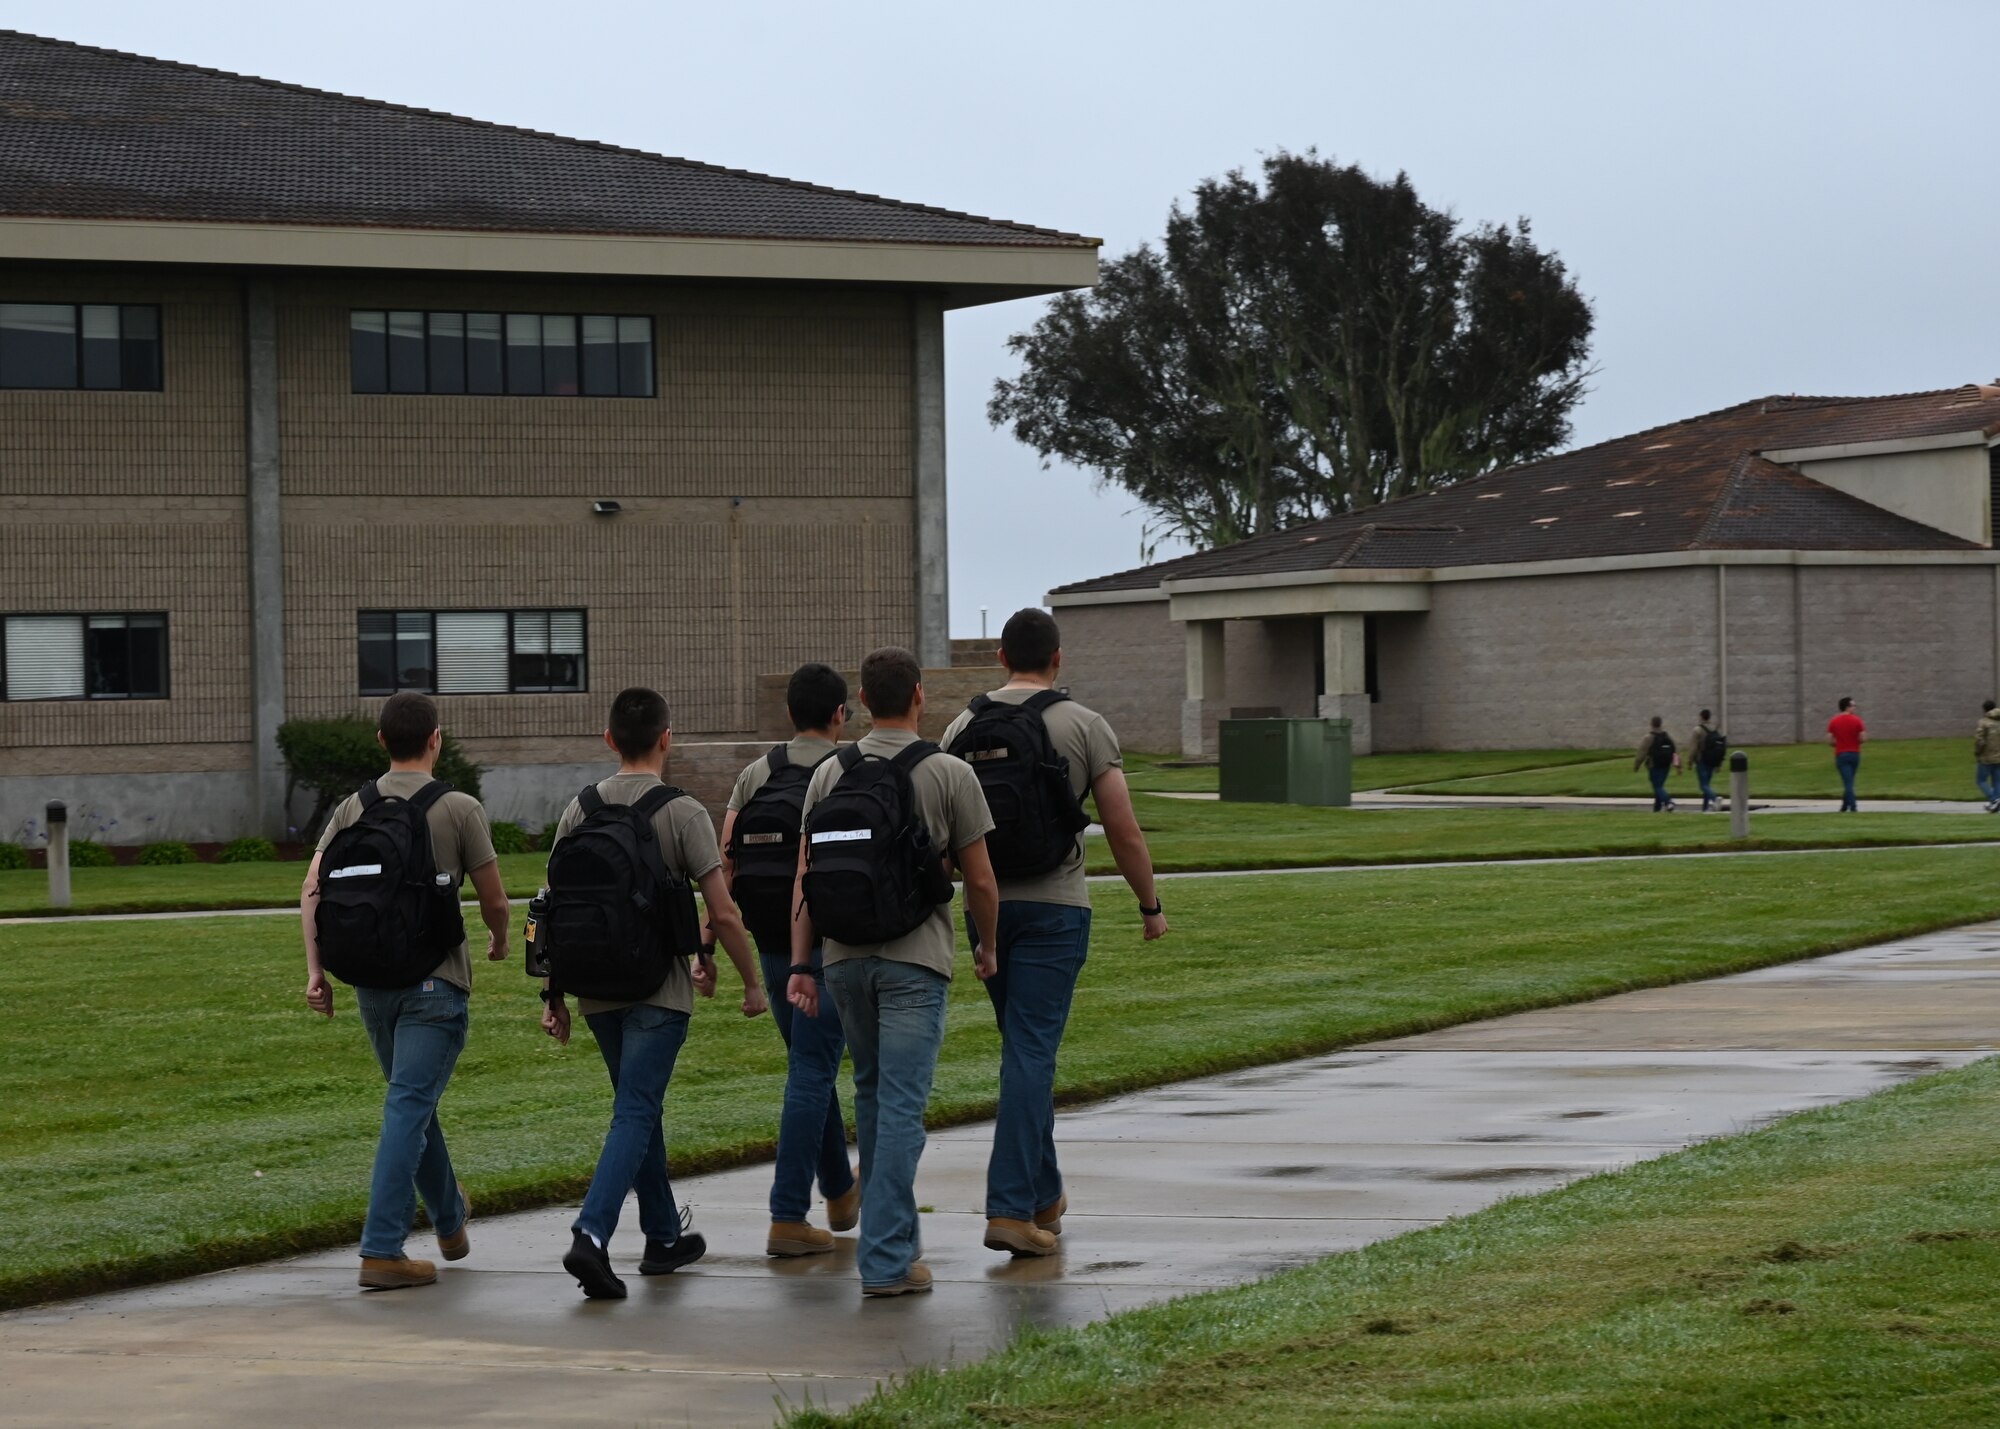 A group of students march in a formation on a sidewalk outside.